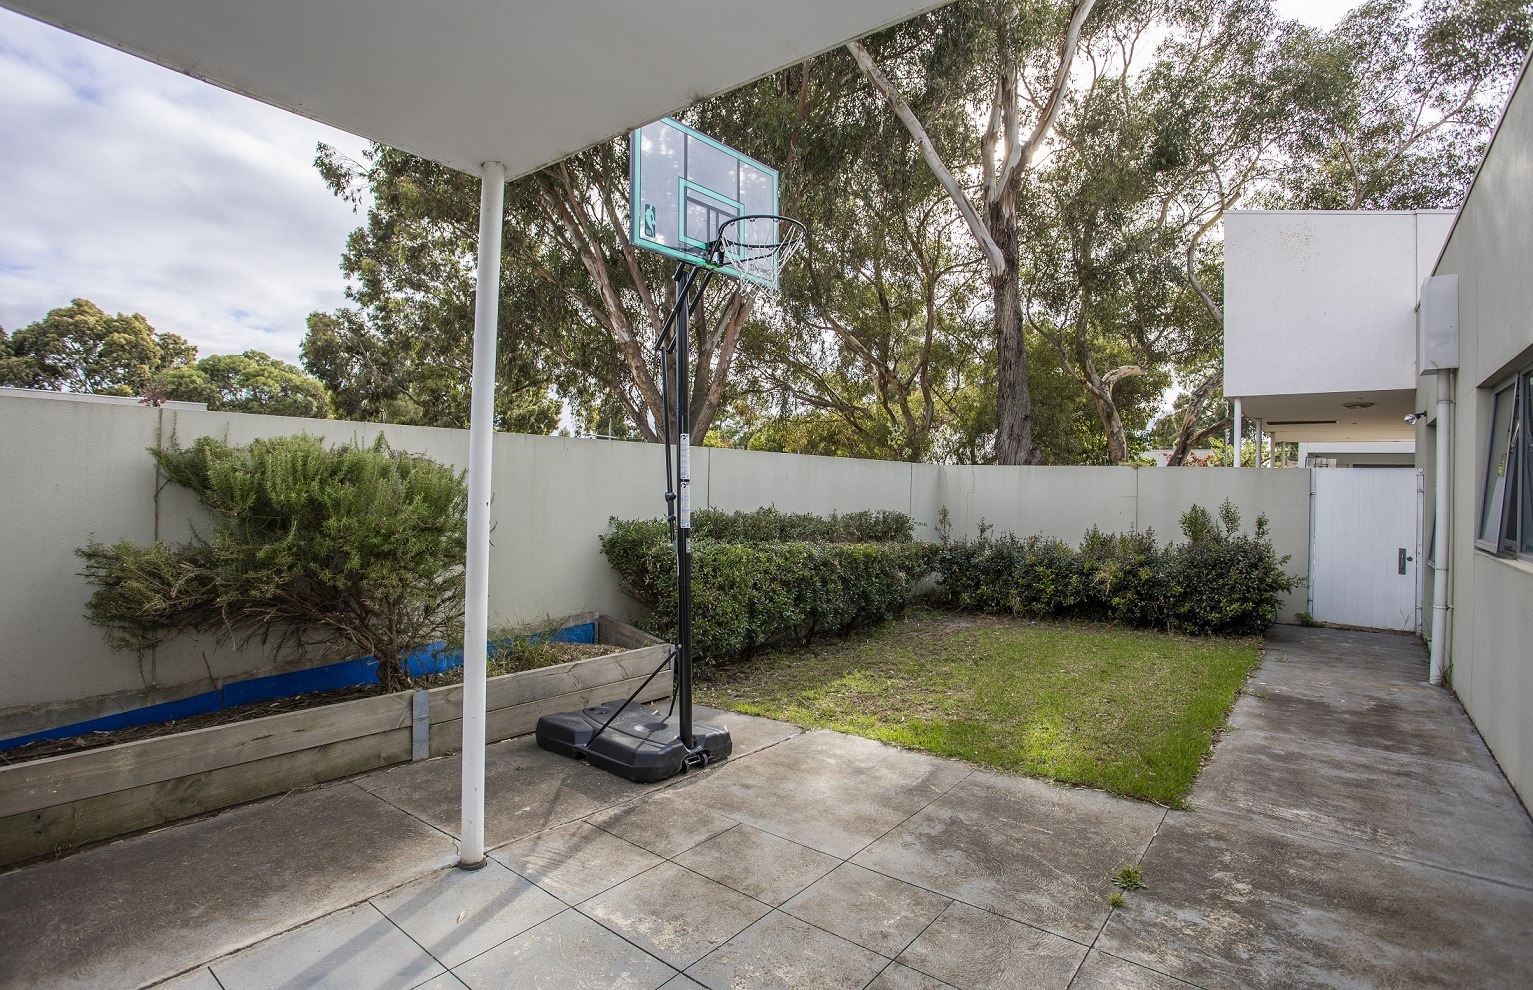 Undercover area with basketball ring and lawn area